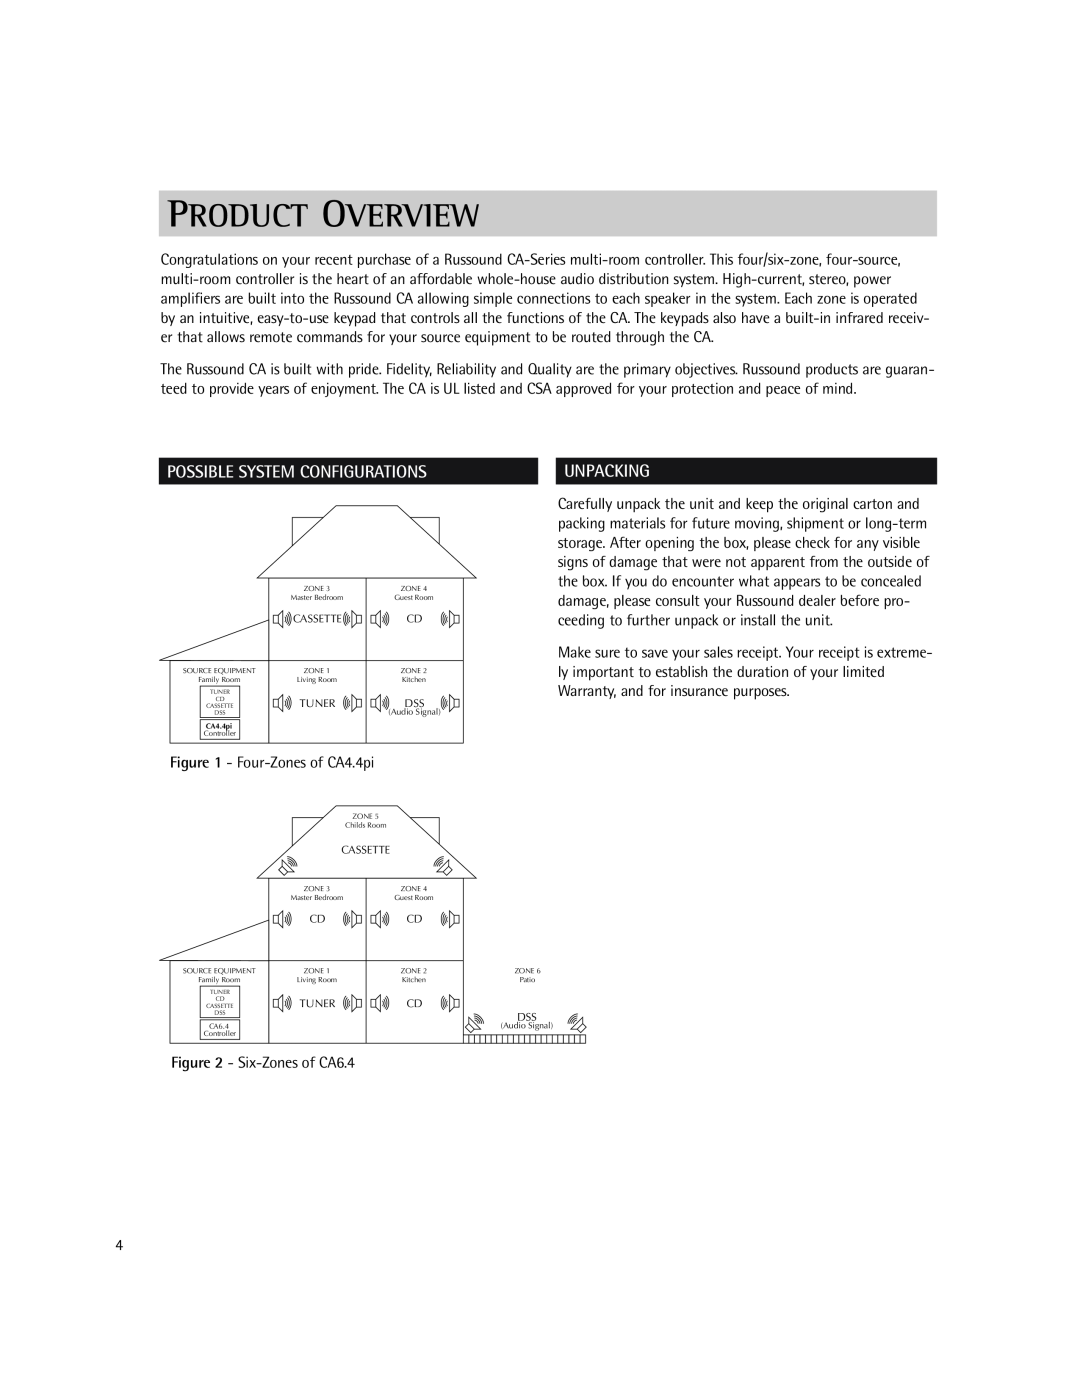 Russound CA-Series instruction manual Product Overview, Possible System Configurations, Unpacking 